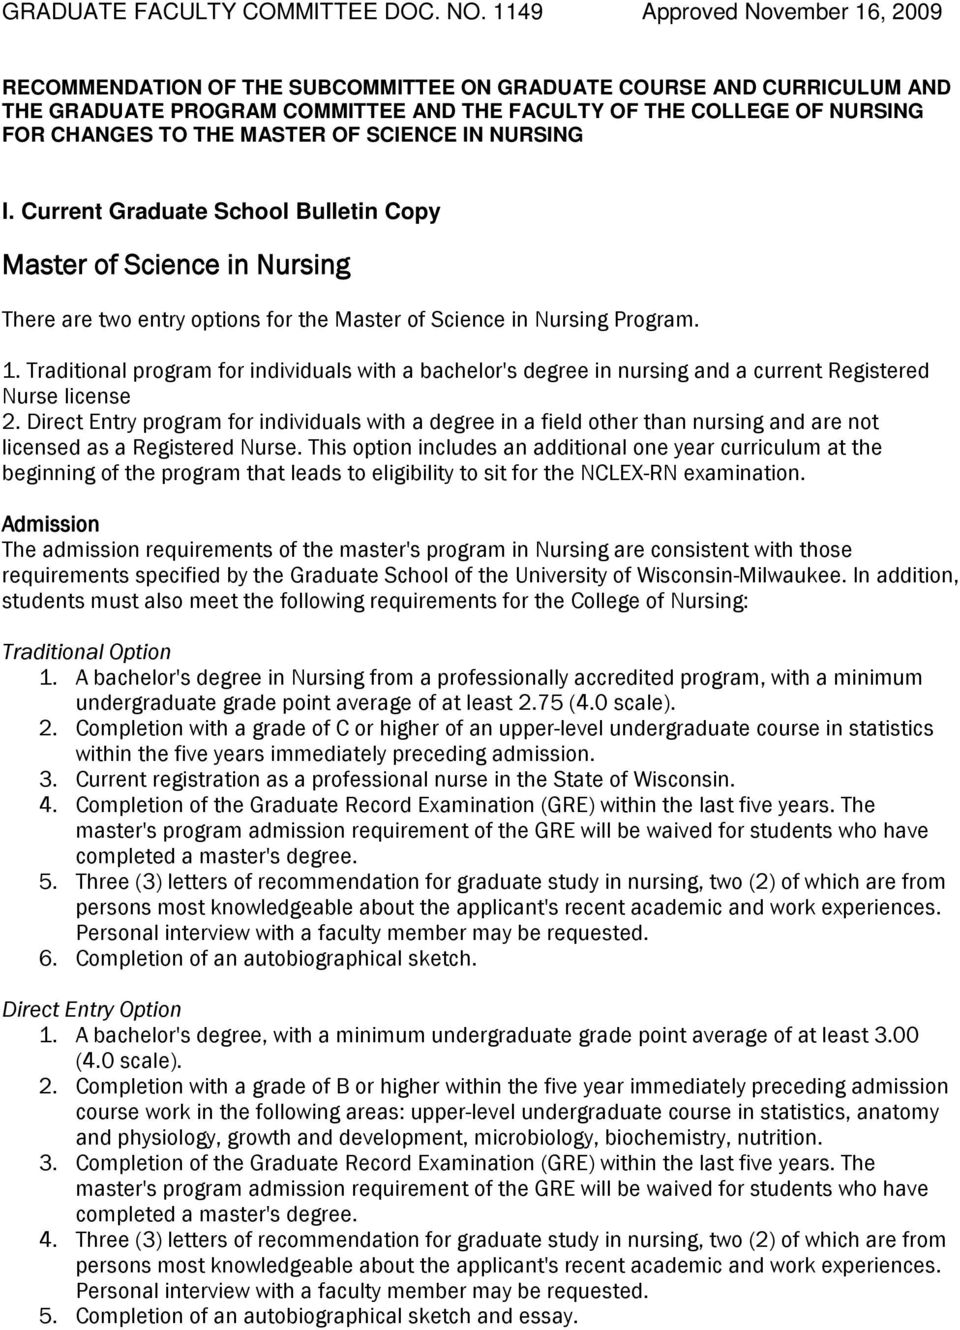 MASTER OF SCIENCE IN NURSING I. Current Graduate School Bulletin Copy Master of Science in Nursing There are two entry options for the Master of Science in Nursing Program. 1.